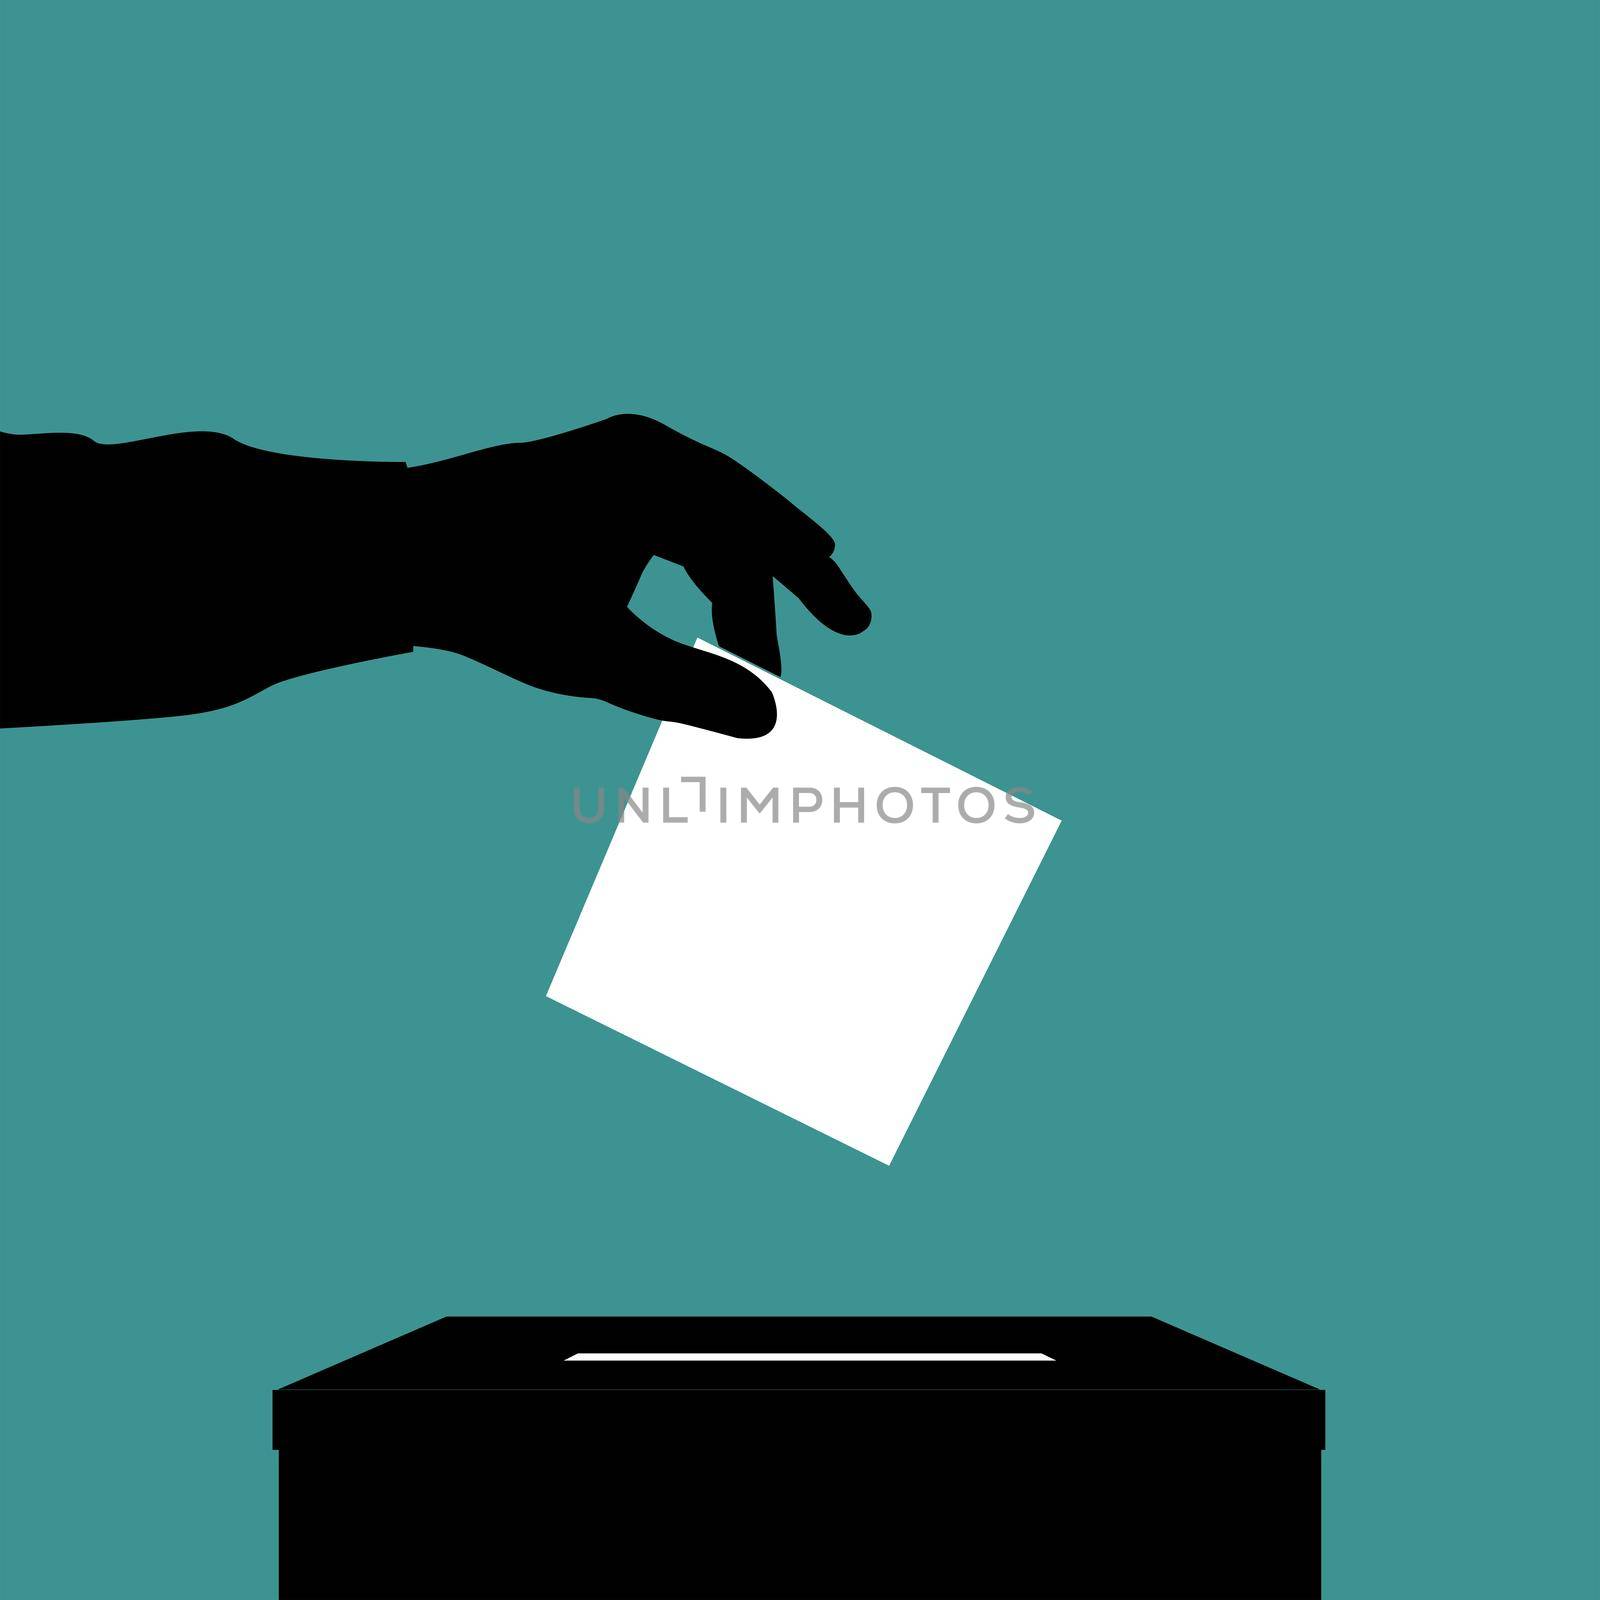 Silhouette of voter man putting ballot into voting box on green background by hibrida13